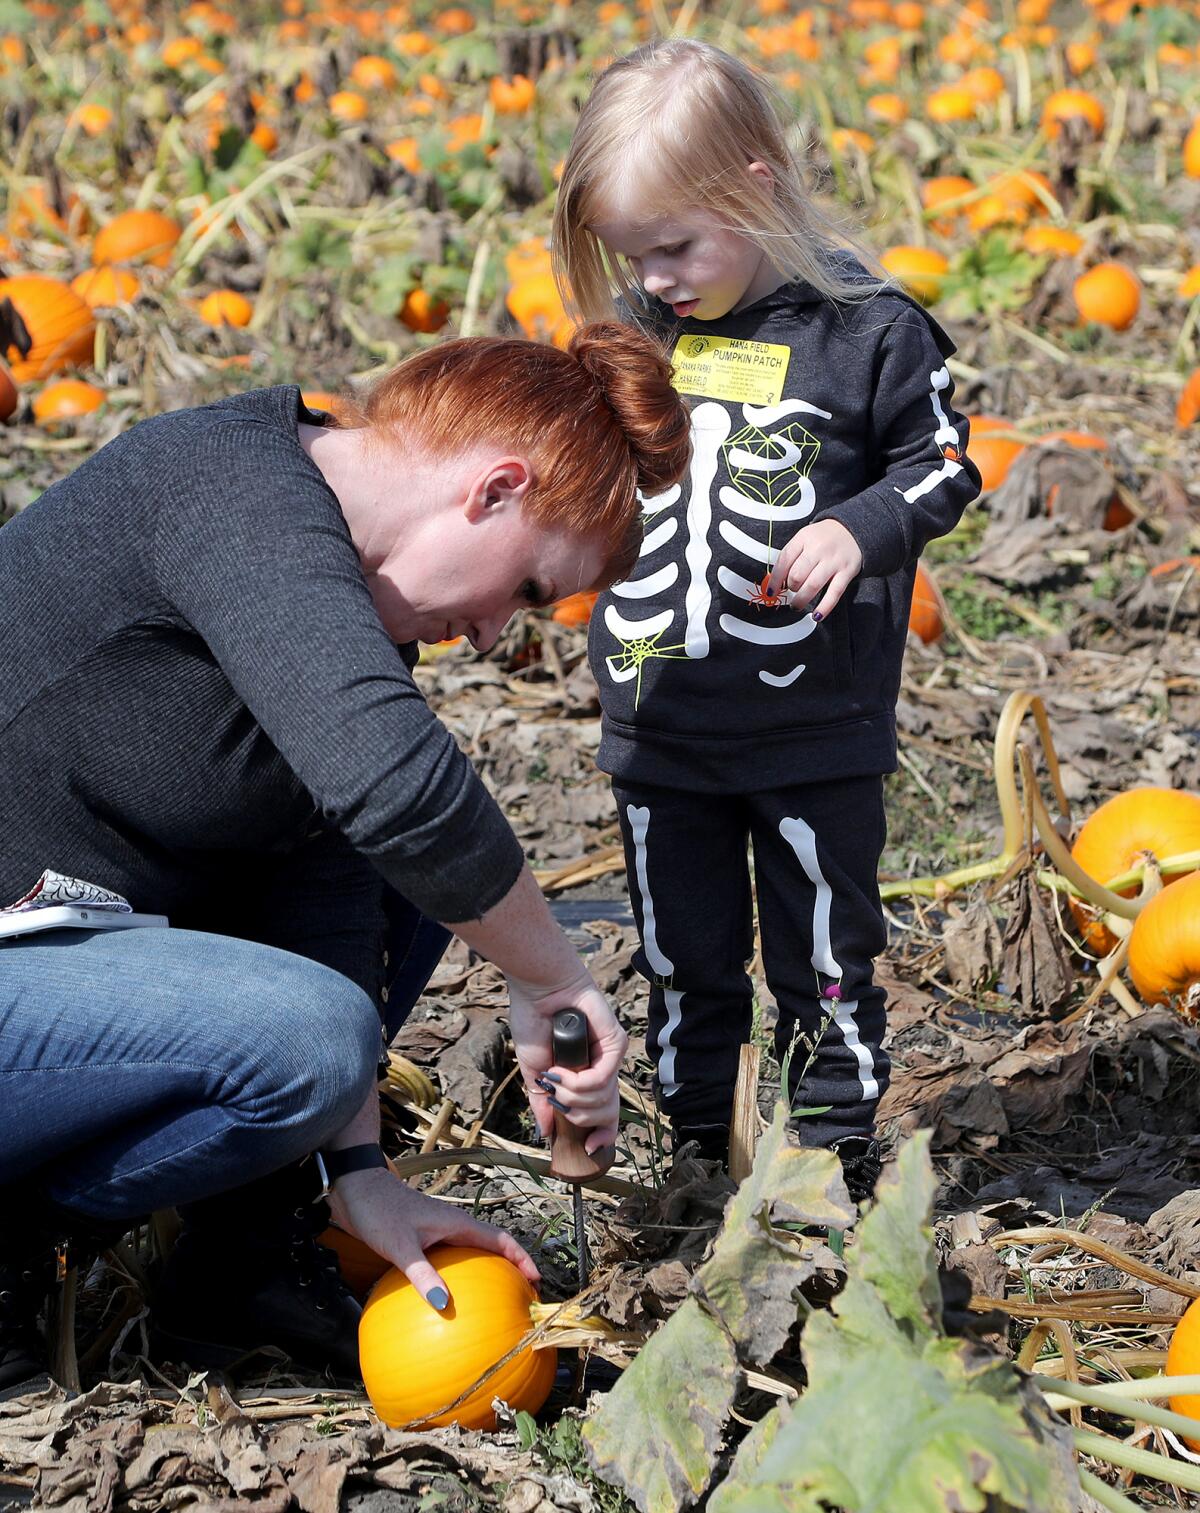 Ember Chancellor, 4, looks on as mom Jenni Black cuts the stem of a small pumpkin she picked out Friday at Hana Field.